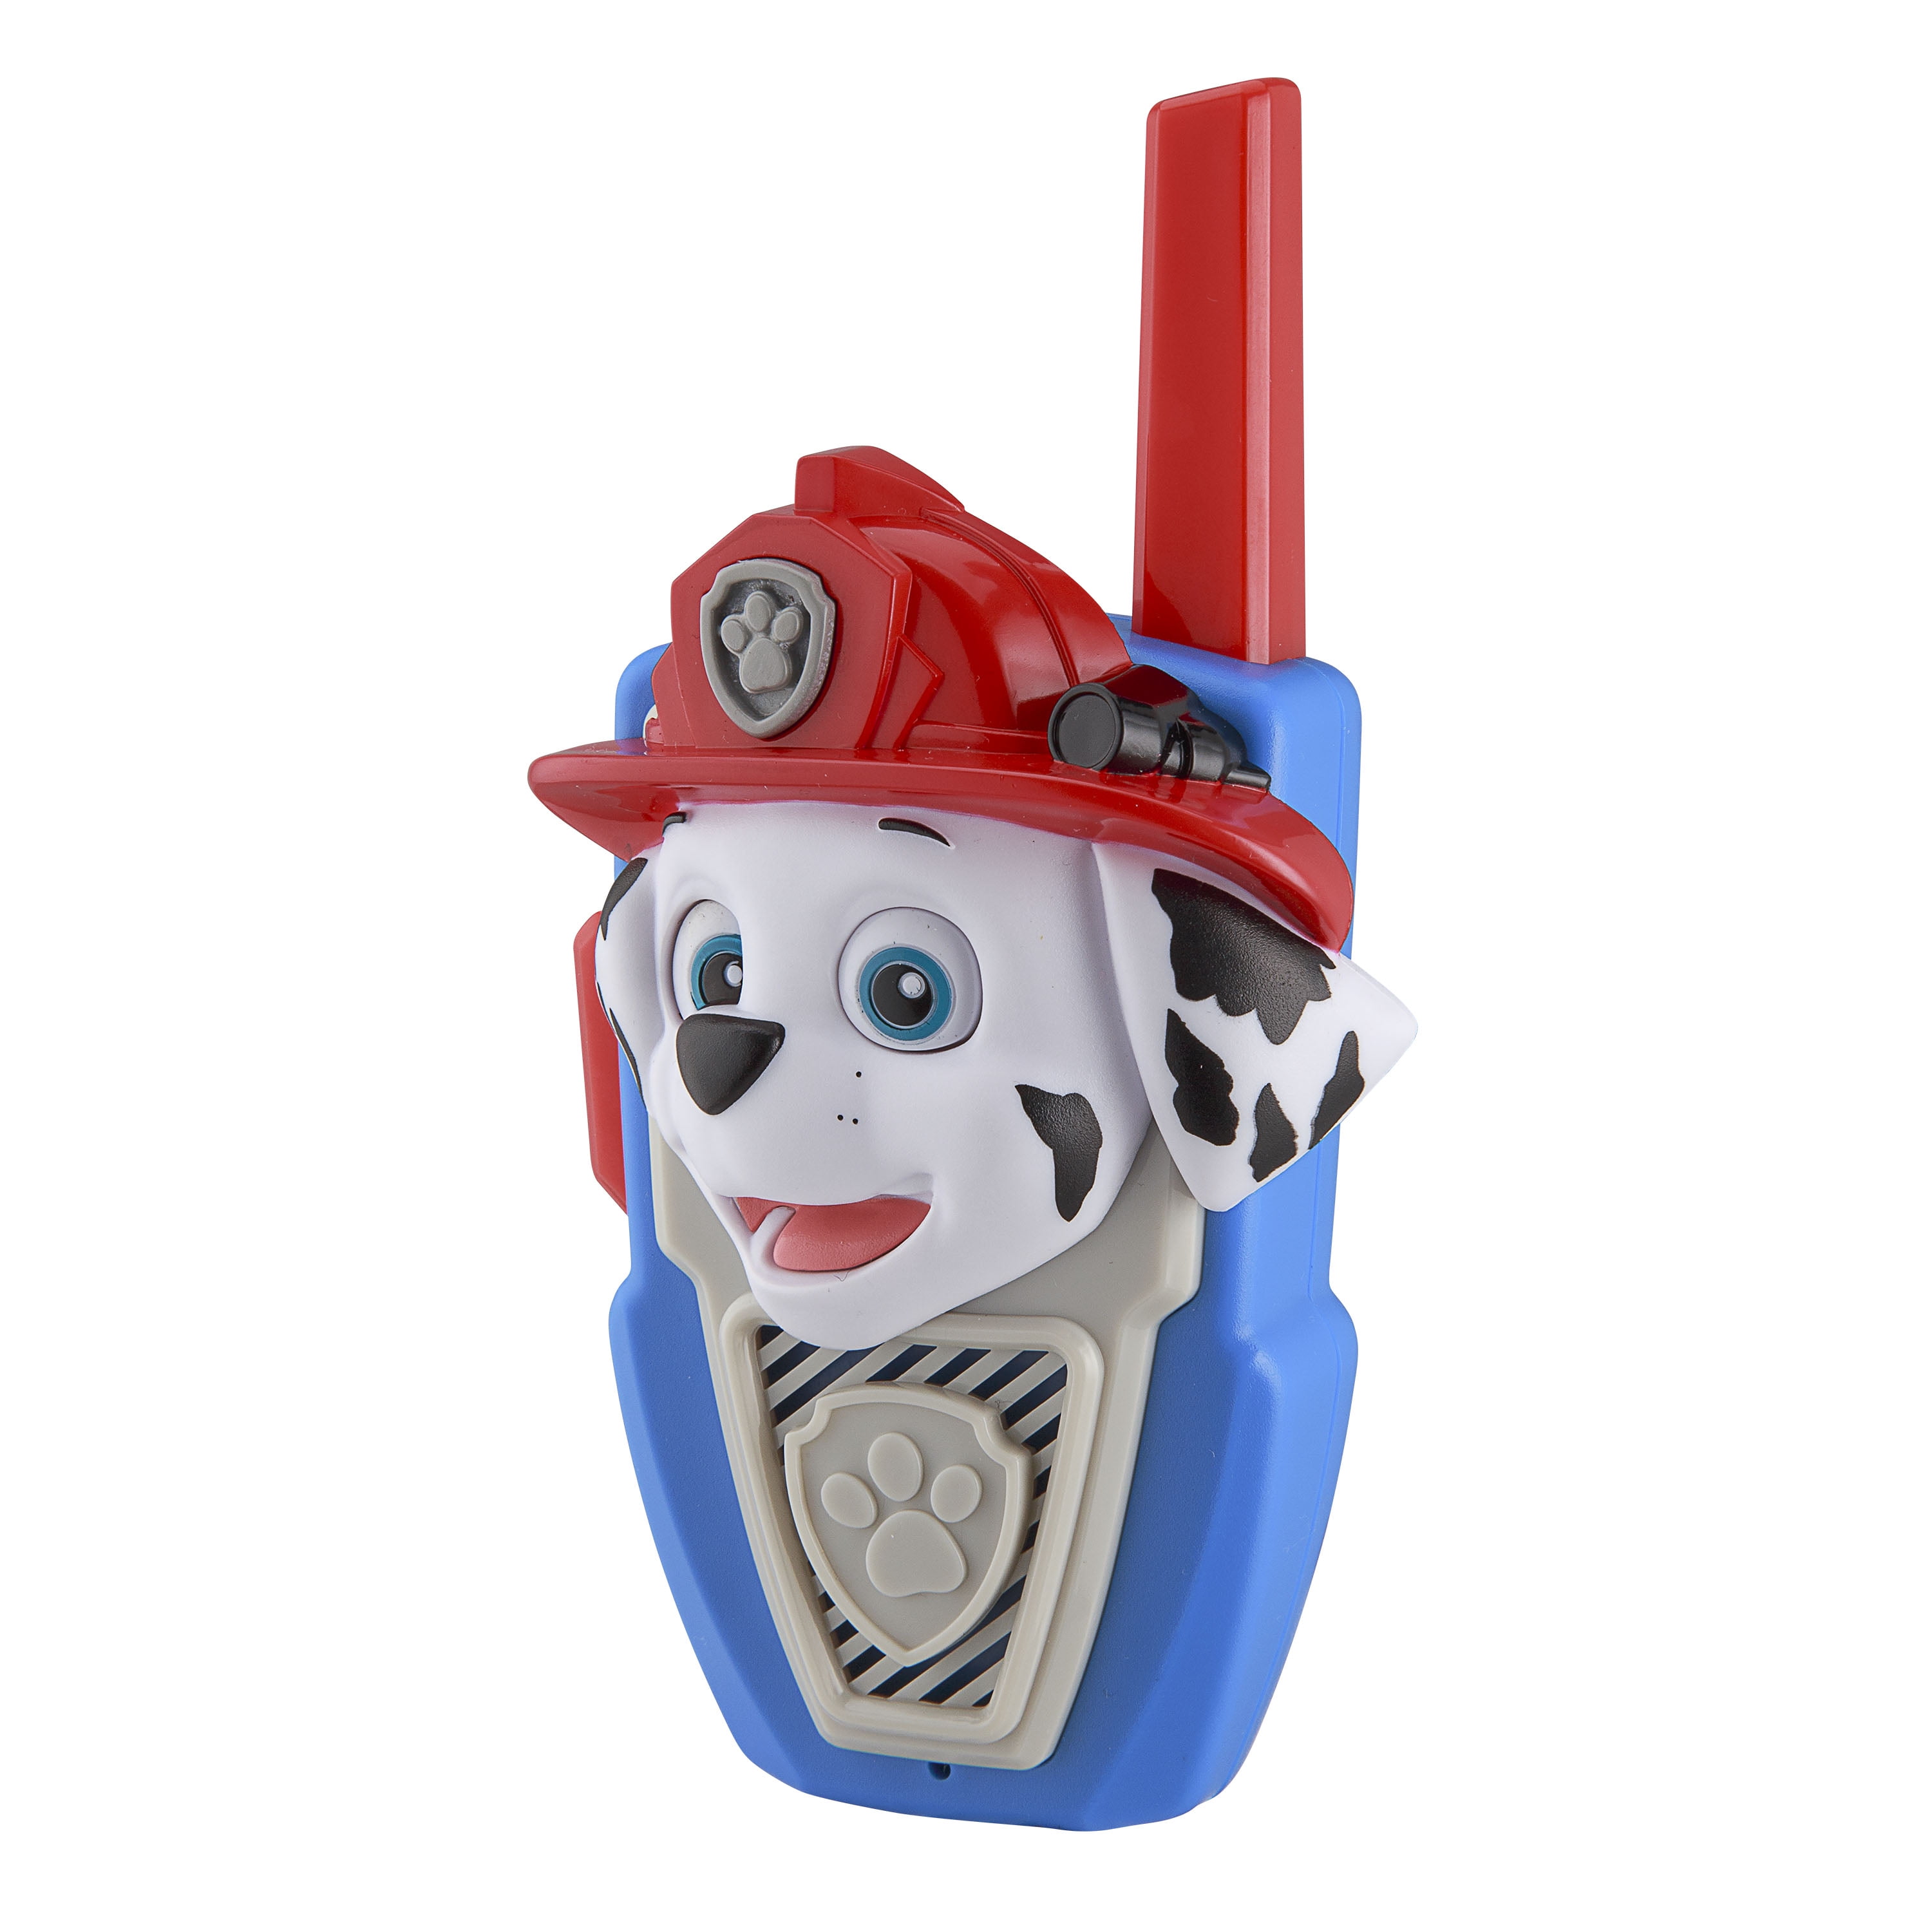 Nickelodeon Paw Patrol Character Talkies for Kids With Extended Range and Adventures. - Walmart.com